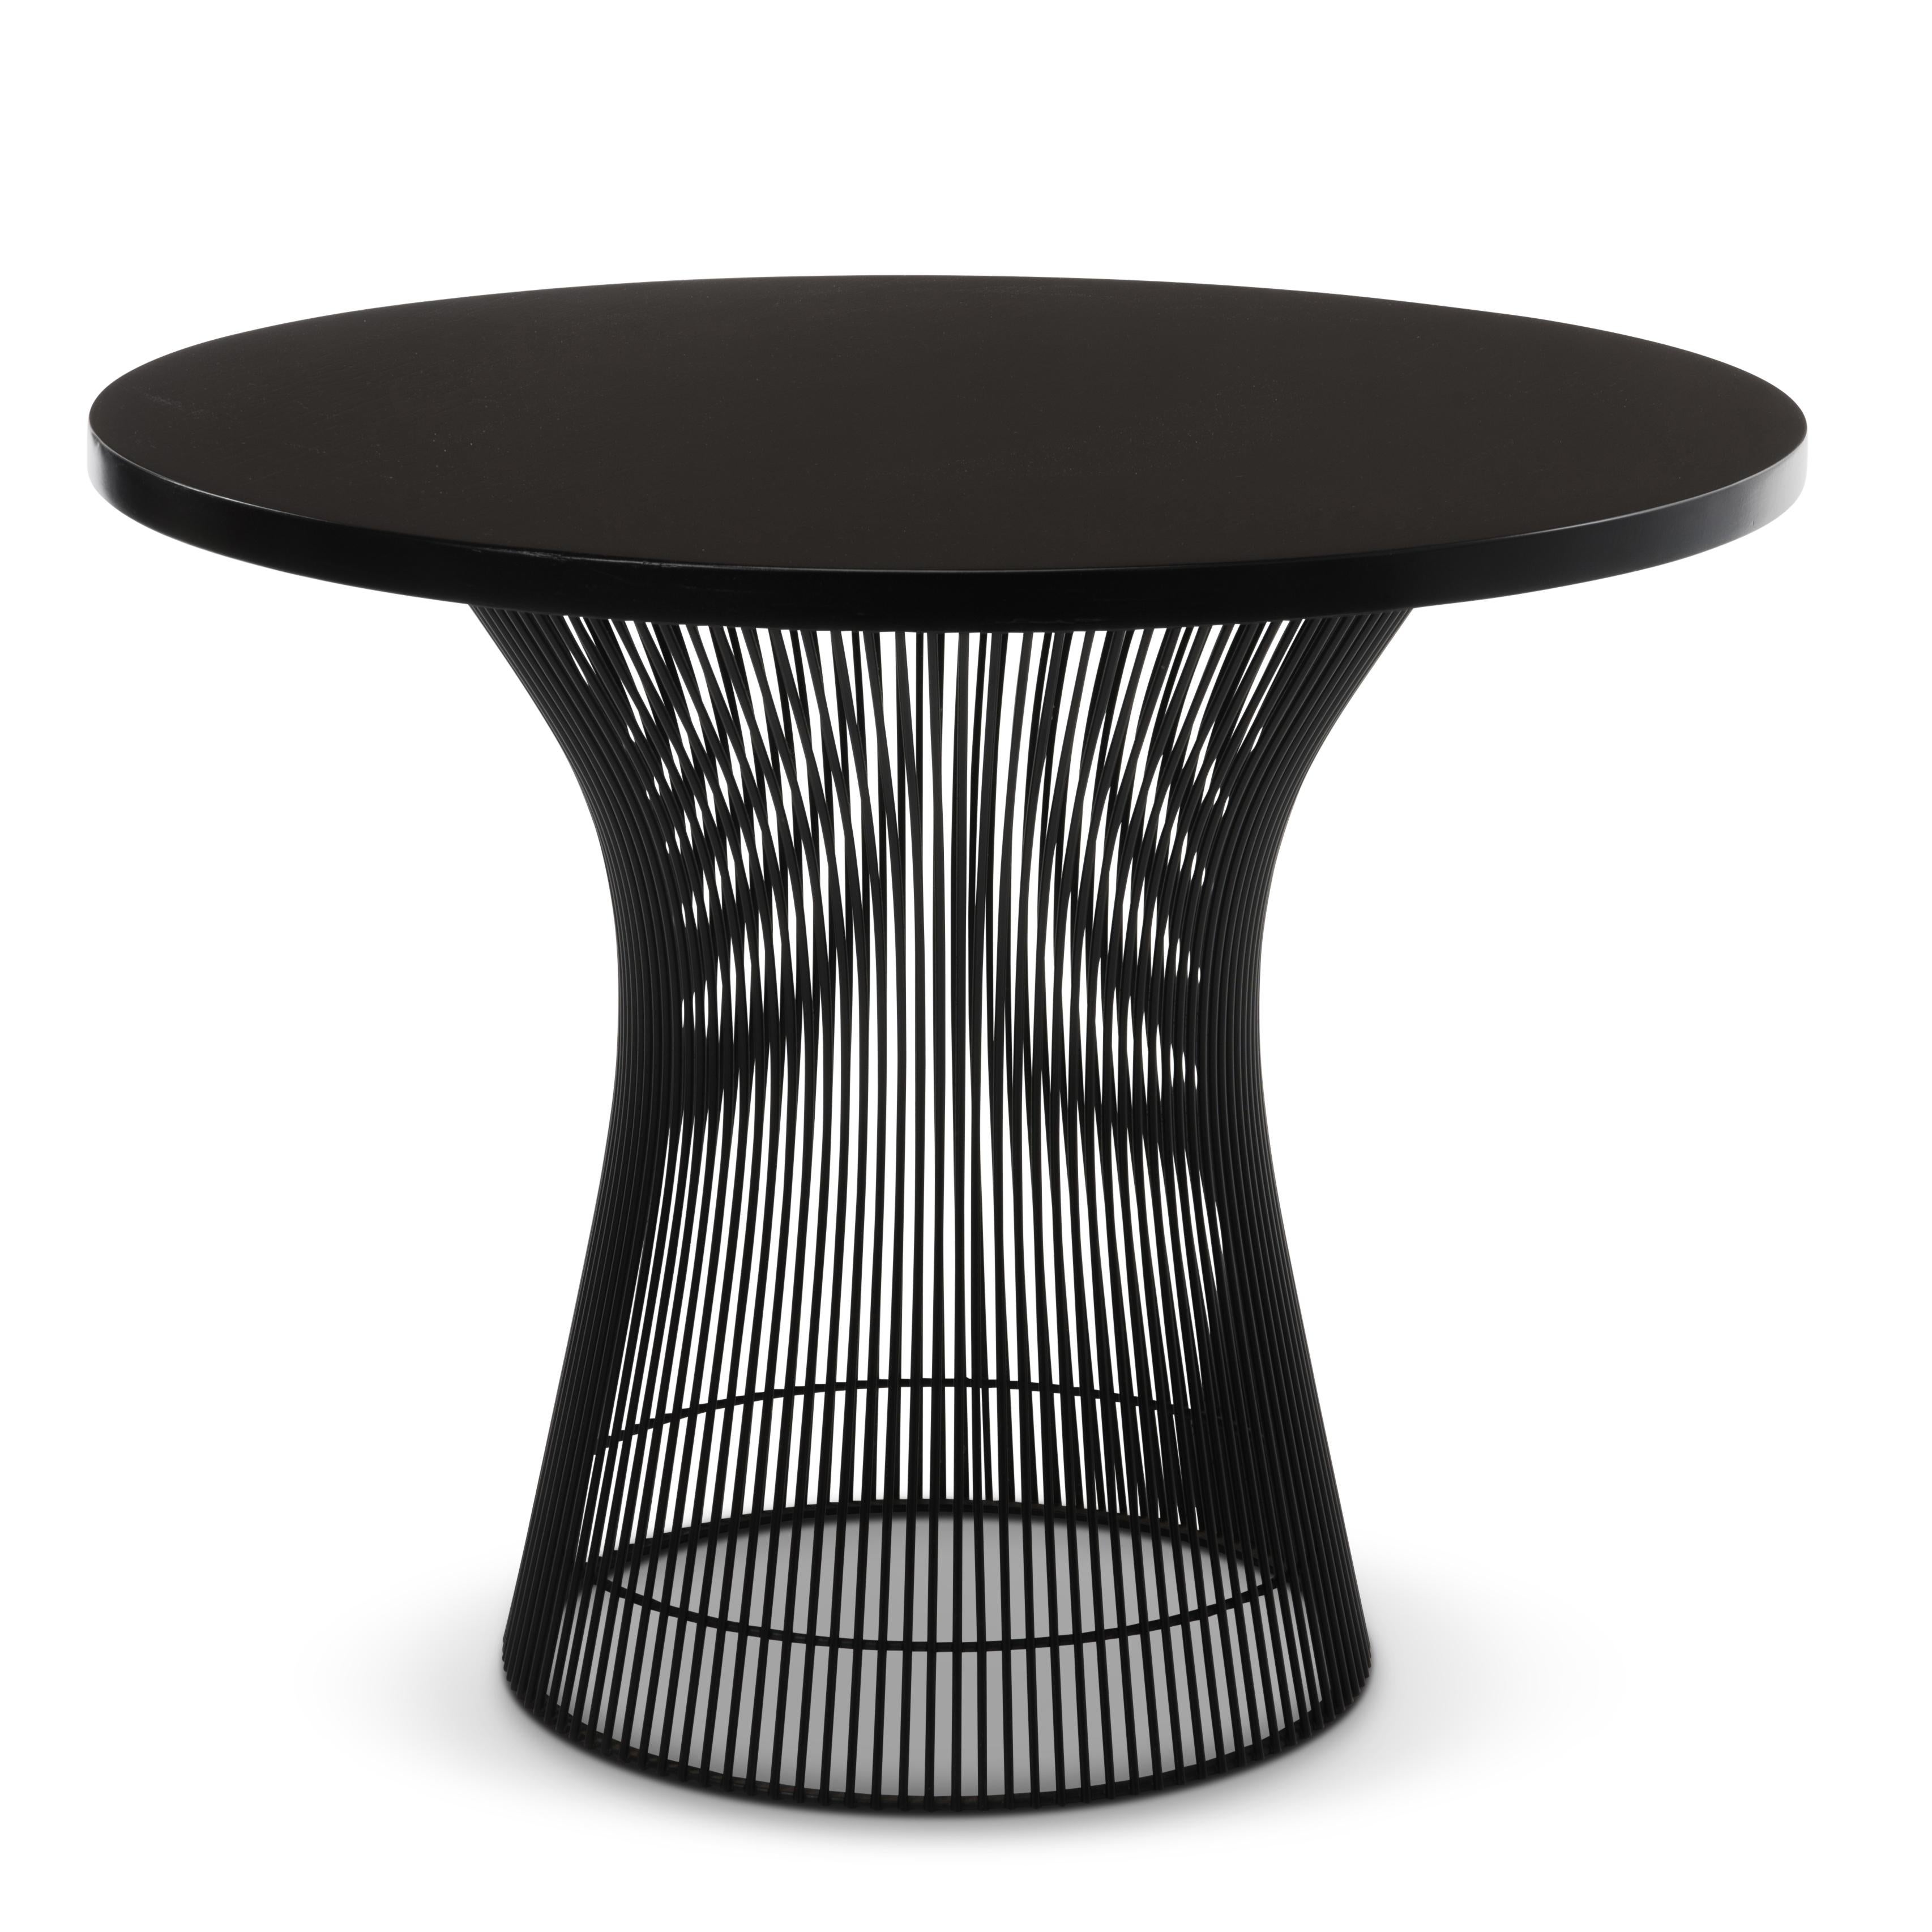 A 1970s ebonized walnut and black base side table designed by Warren Platner for Knoll Associates from the estate of a Knoll employee in East Greenville, PA. This table is unmarked.

The last photograph shows a this table to the right with a